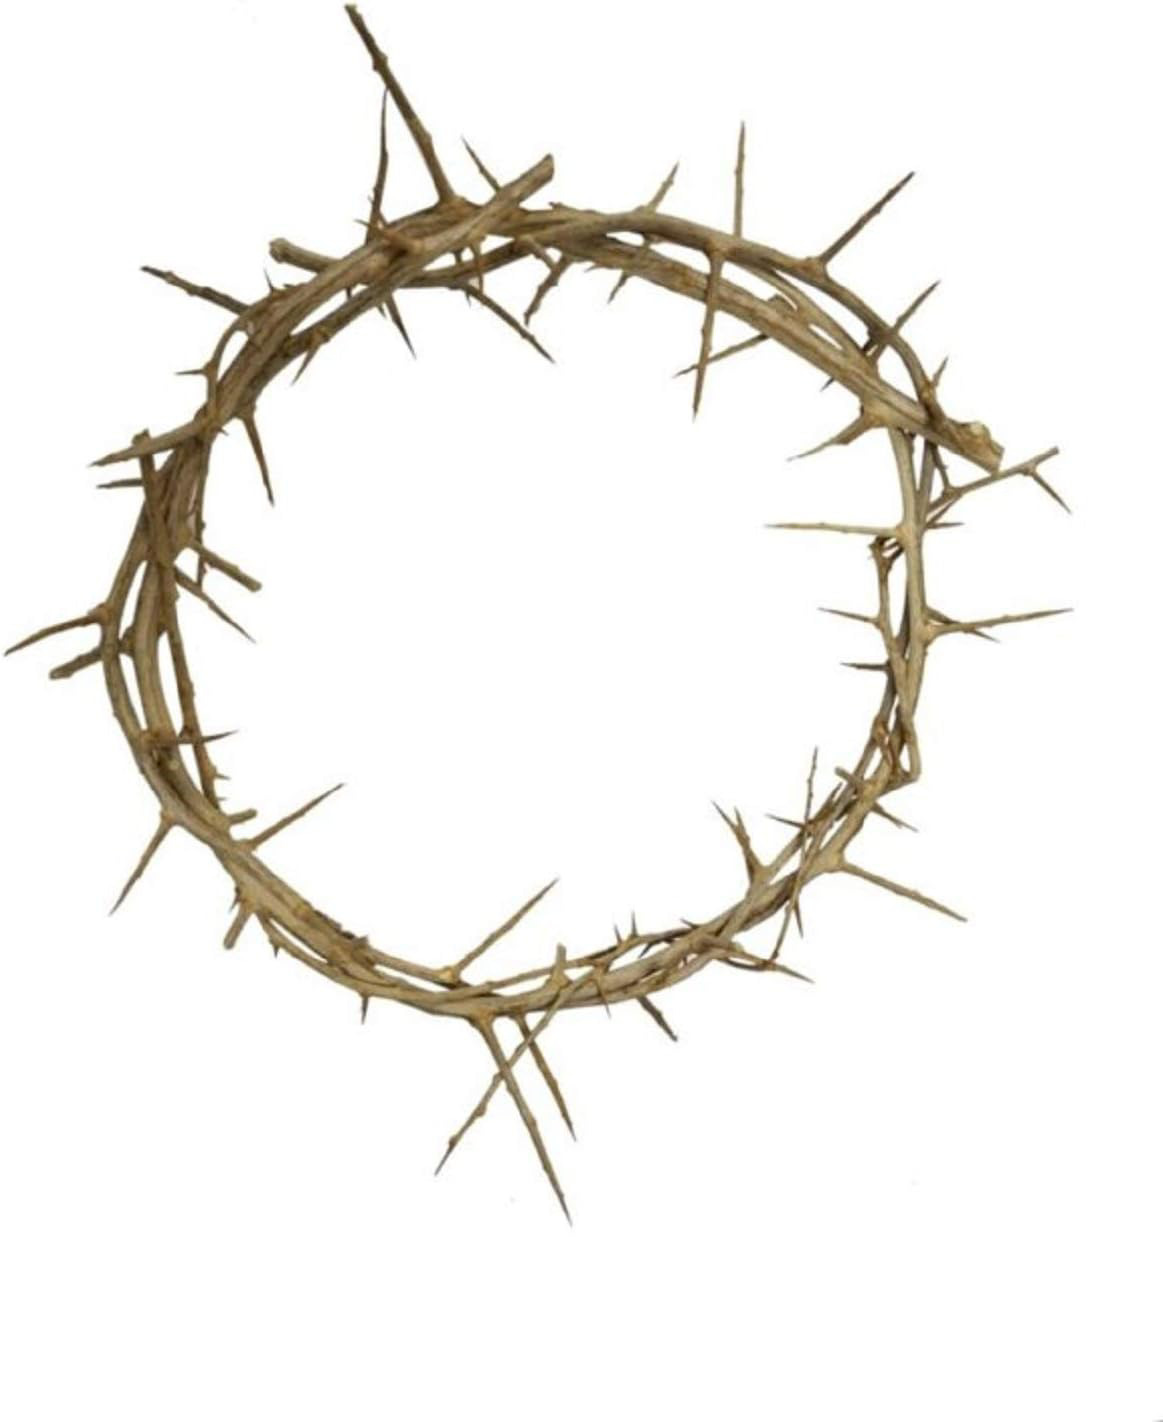 Bethlehem Gifts TM Authentic Jesus Biblical Crown of Thorns from The Holy Land